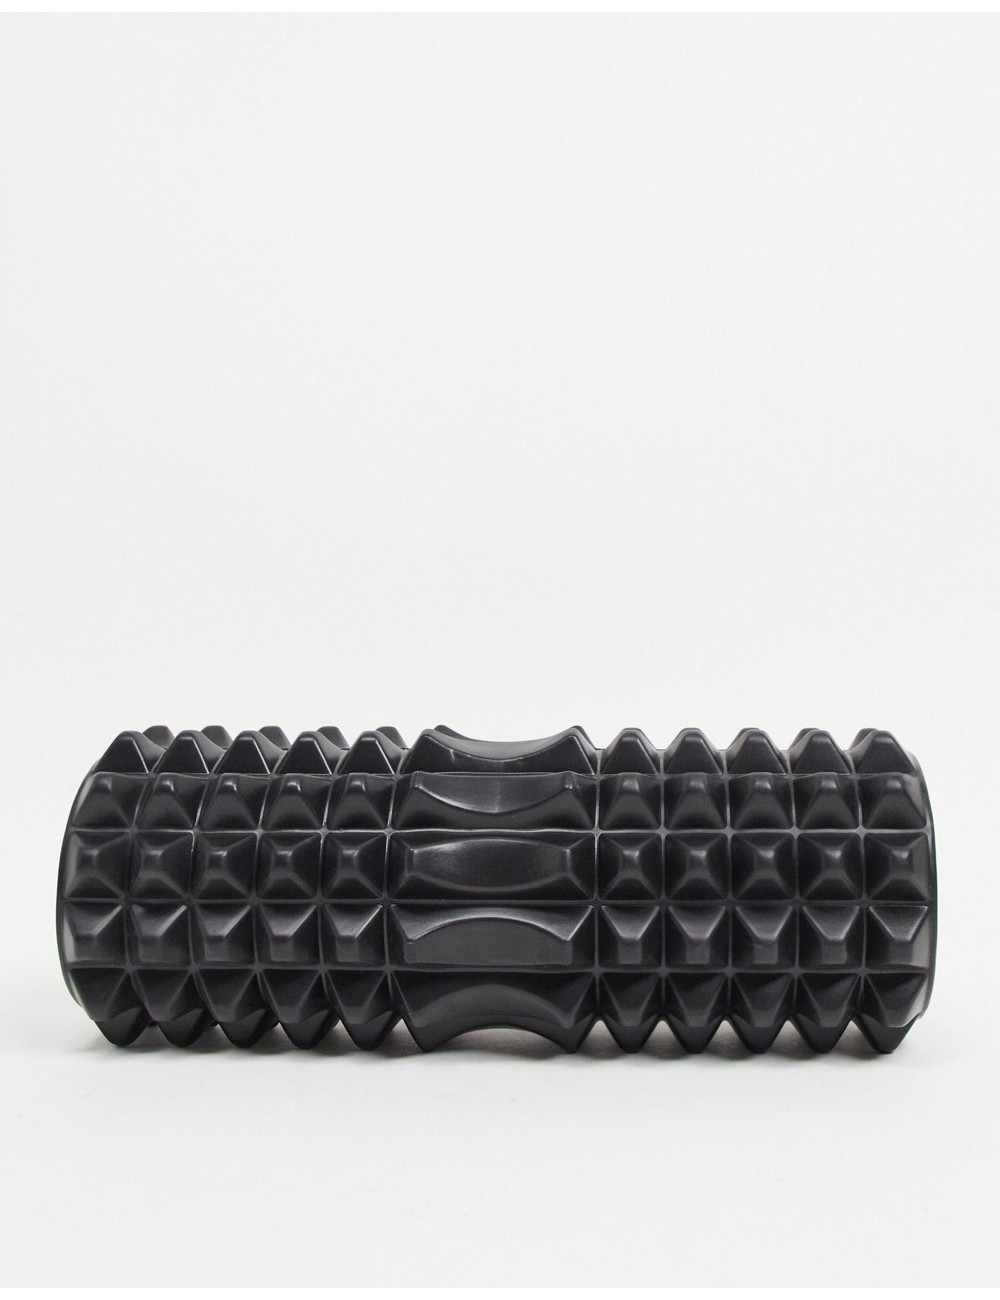 FitHut foam roller with...